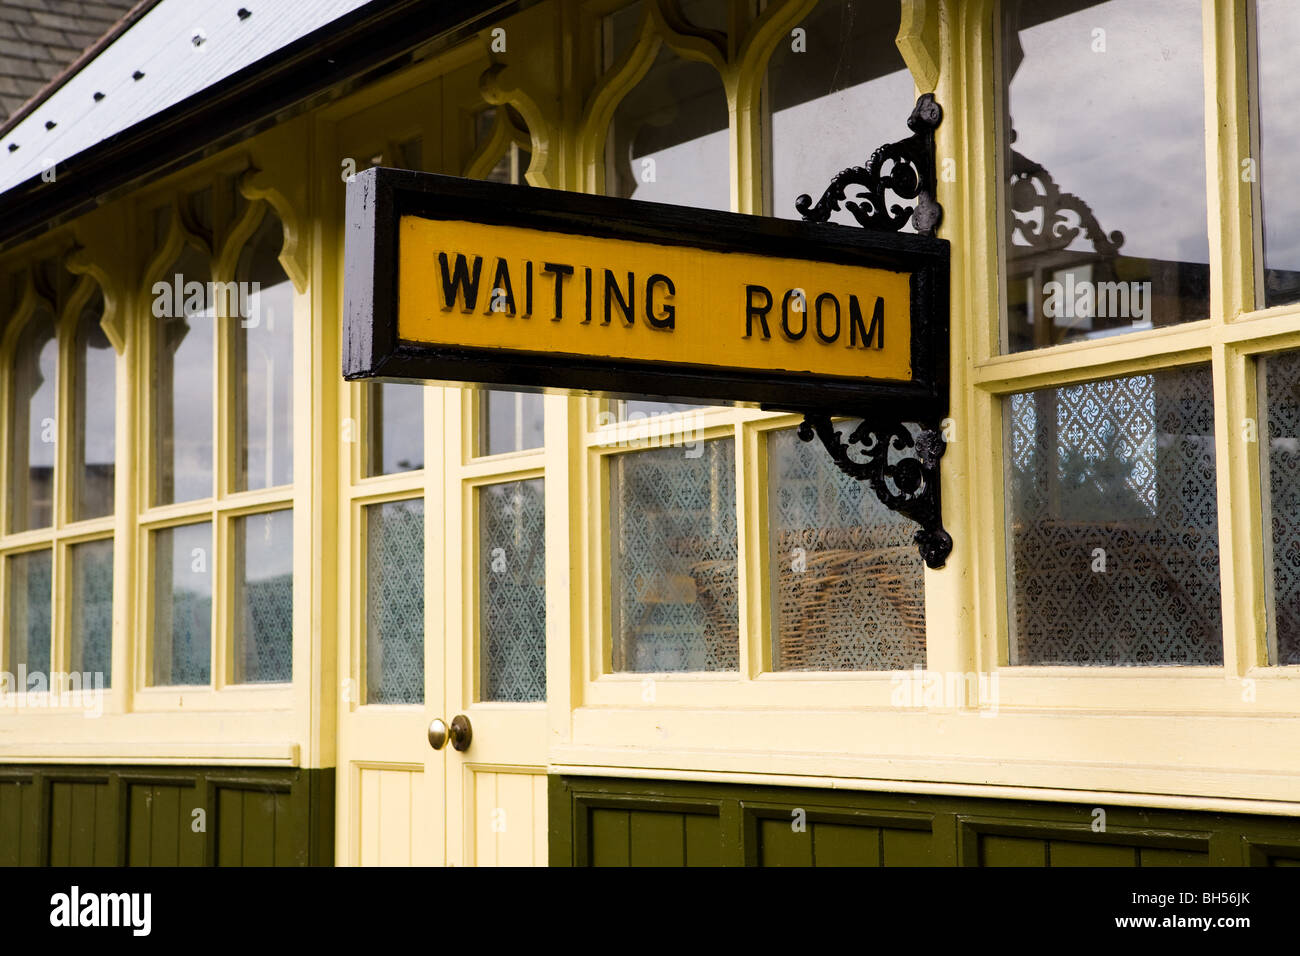 Waiting Room and sign Embsay Station, Embsay & Bolton Abbey Steam Railway, Yorkshire Dales, England Stock Photo